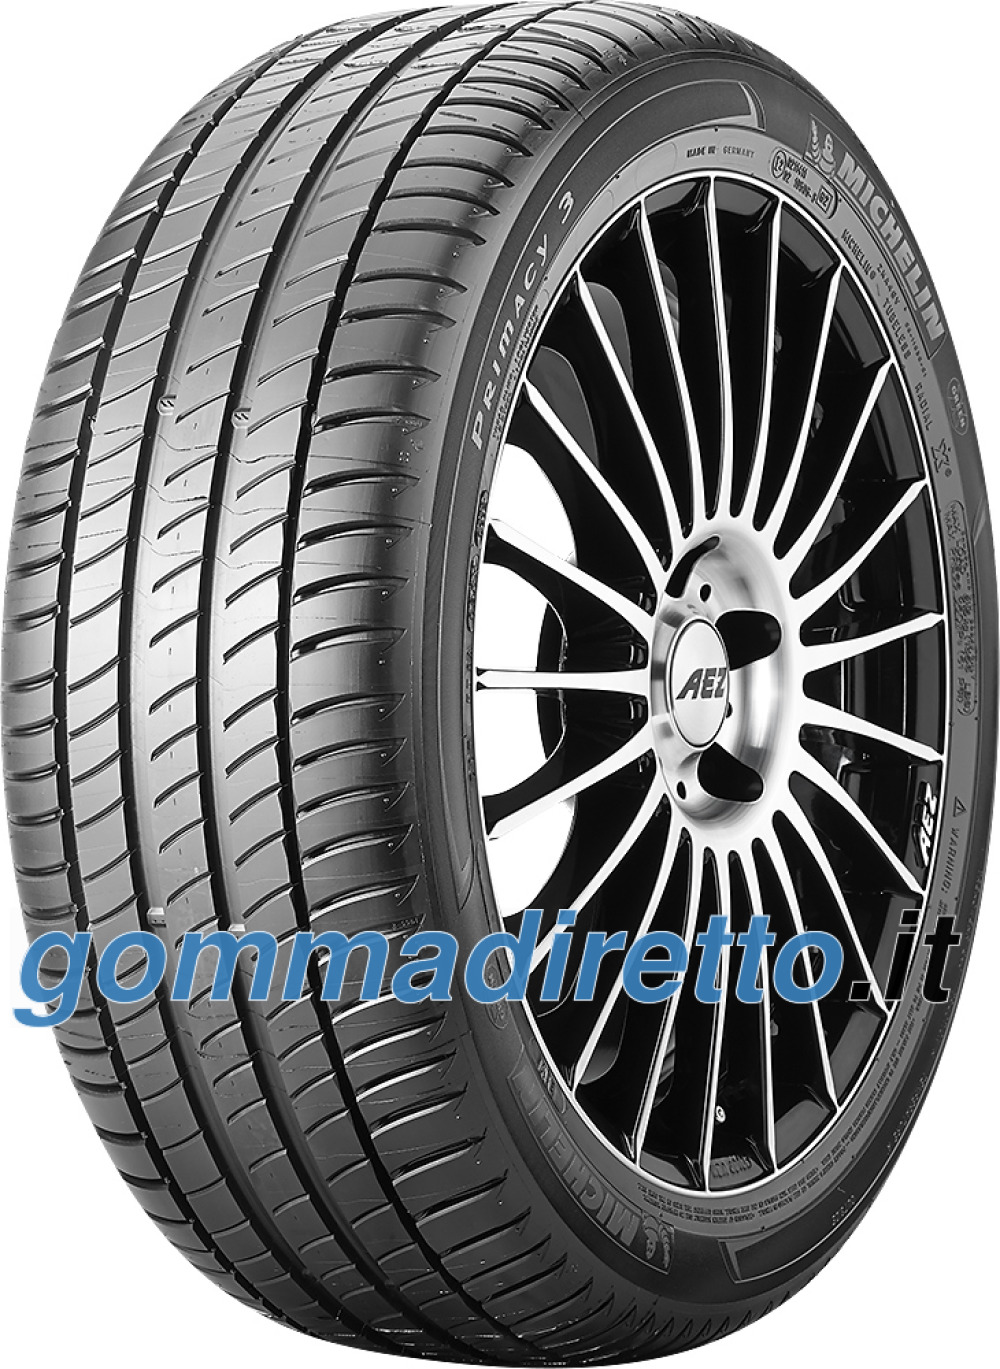 Image of Michelin Primacy 3 ( 215/65 R16 102H XL )